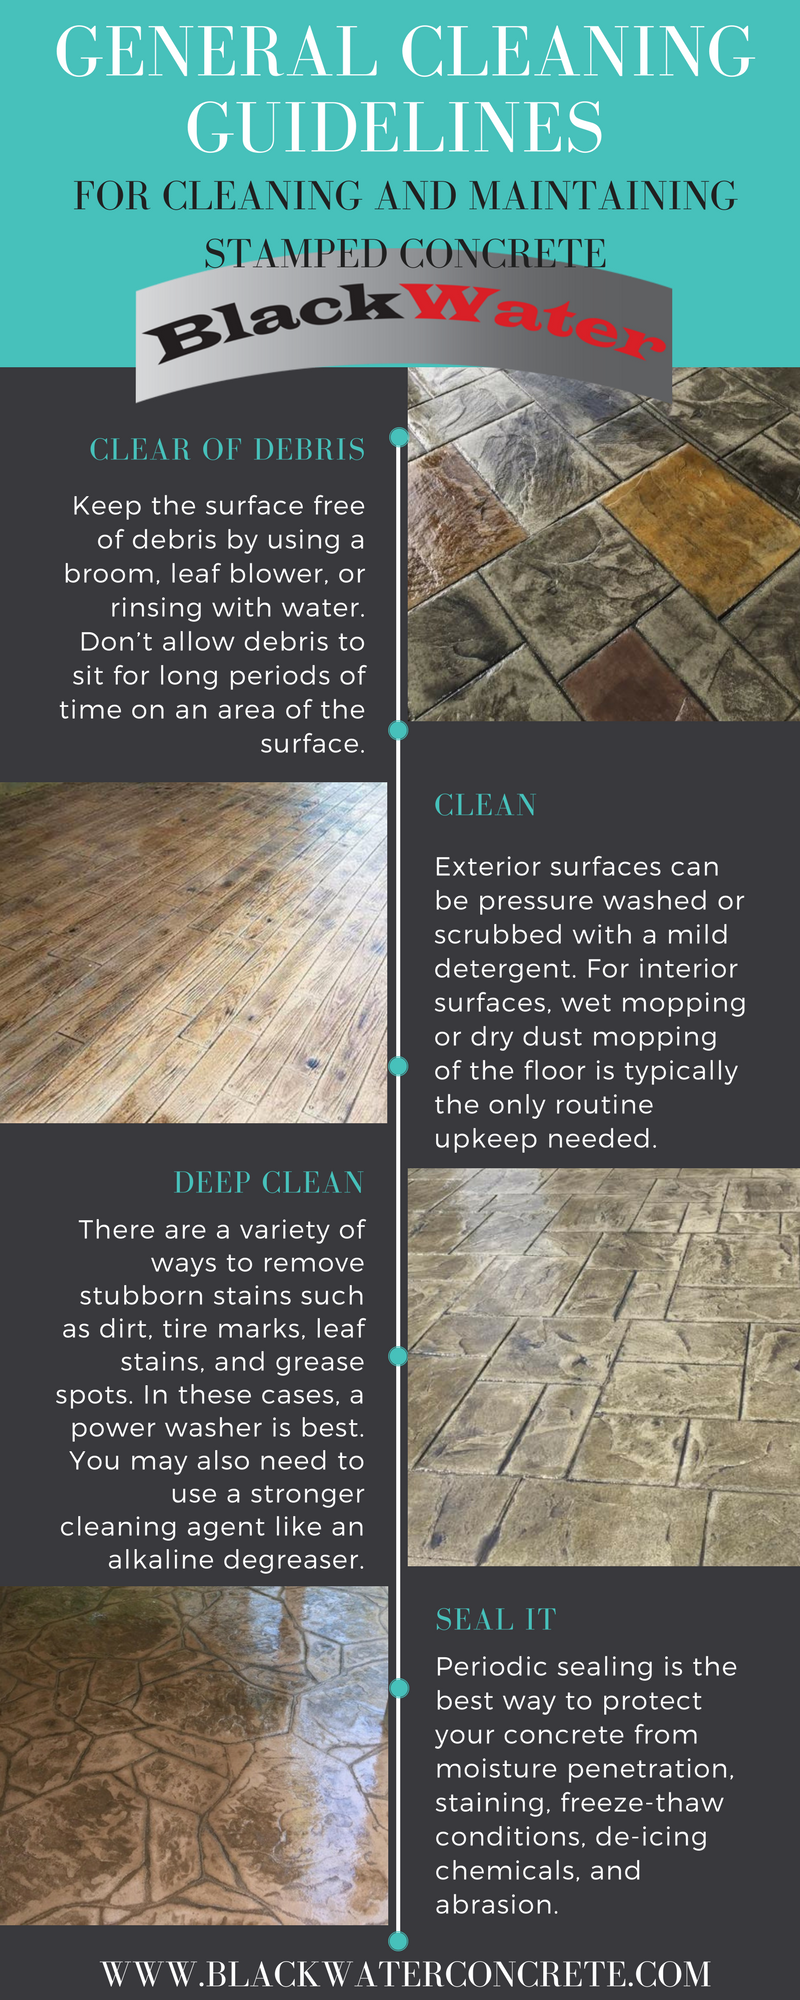 guidelines for cleaning and maintaining stamped concrete